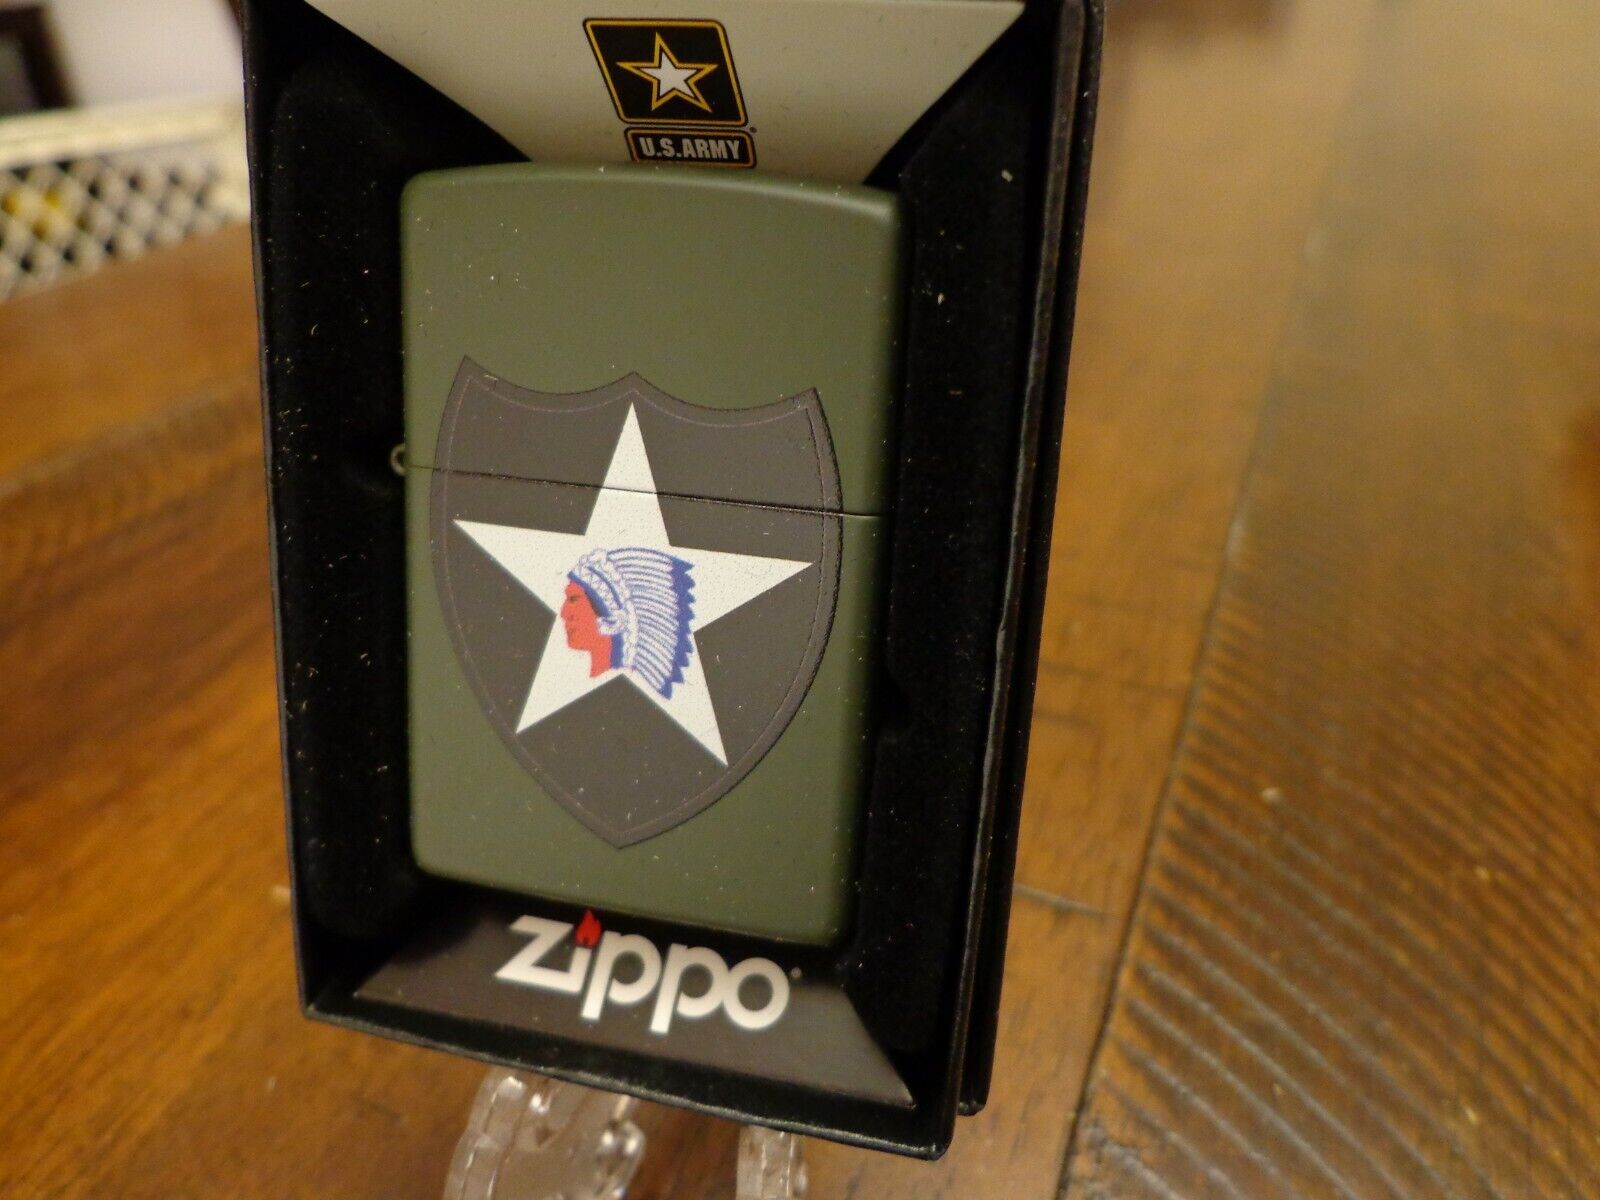 UNITED STATES ARMY US 2ND INFANTRY DIVISION ZIPPO LIGHTER MINT IN BOX